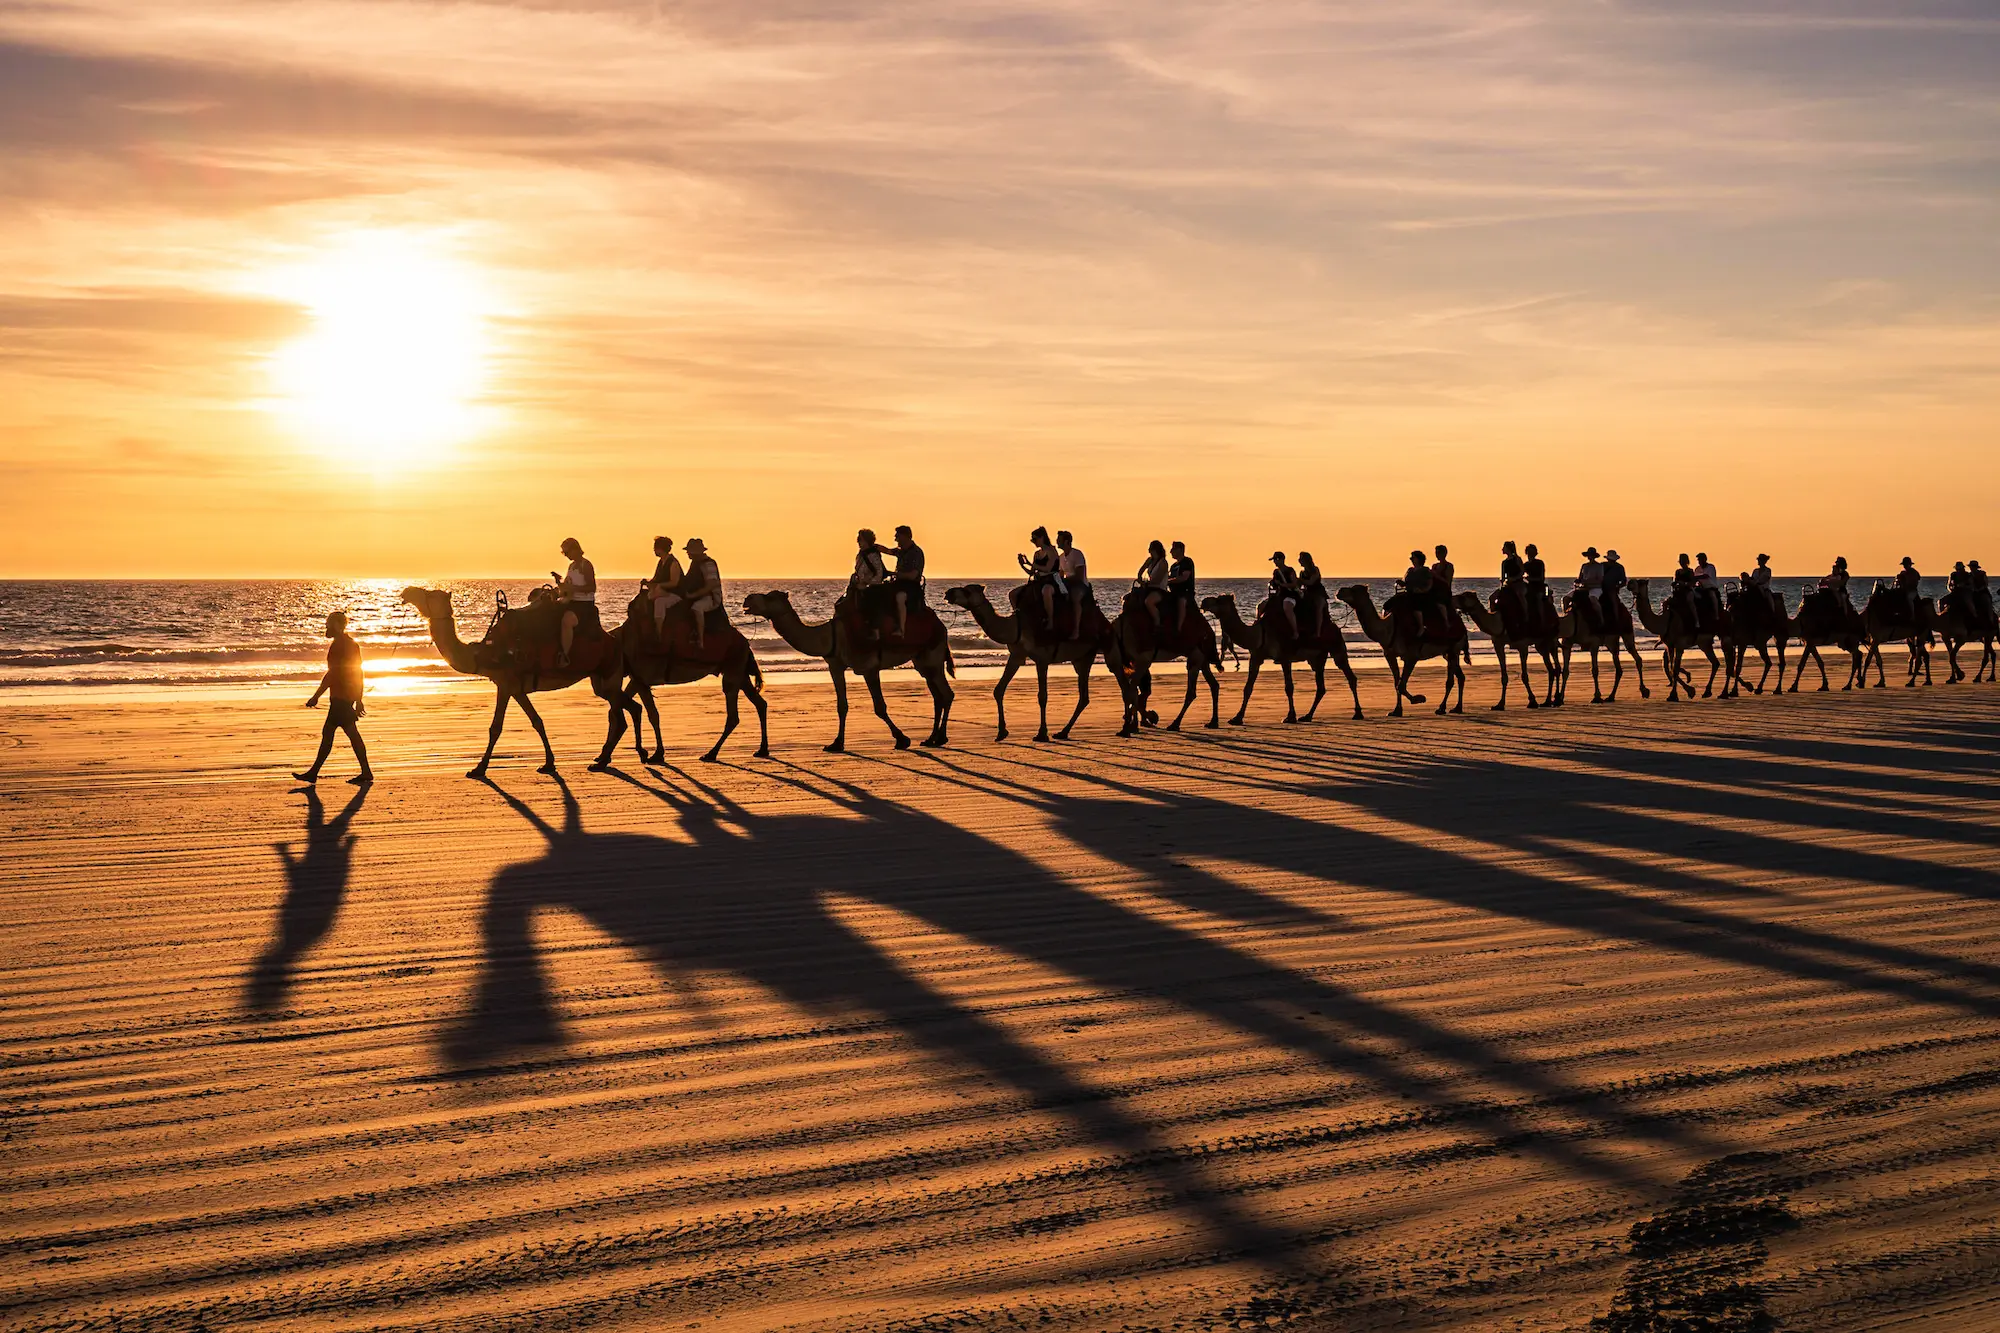 People riding camels in formation on a beach as the sun sets